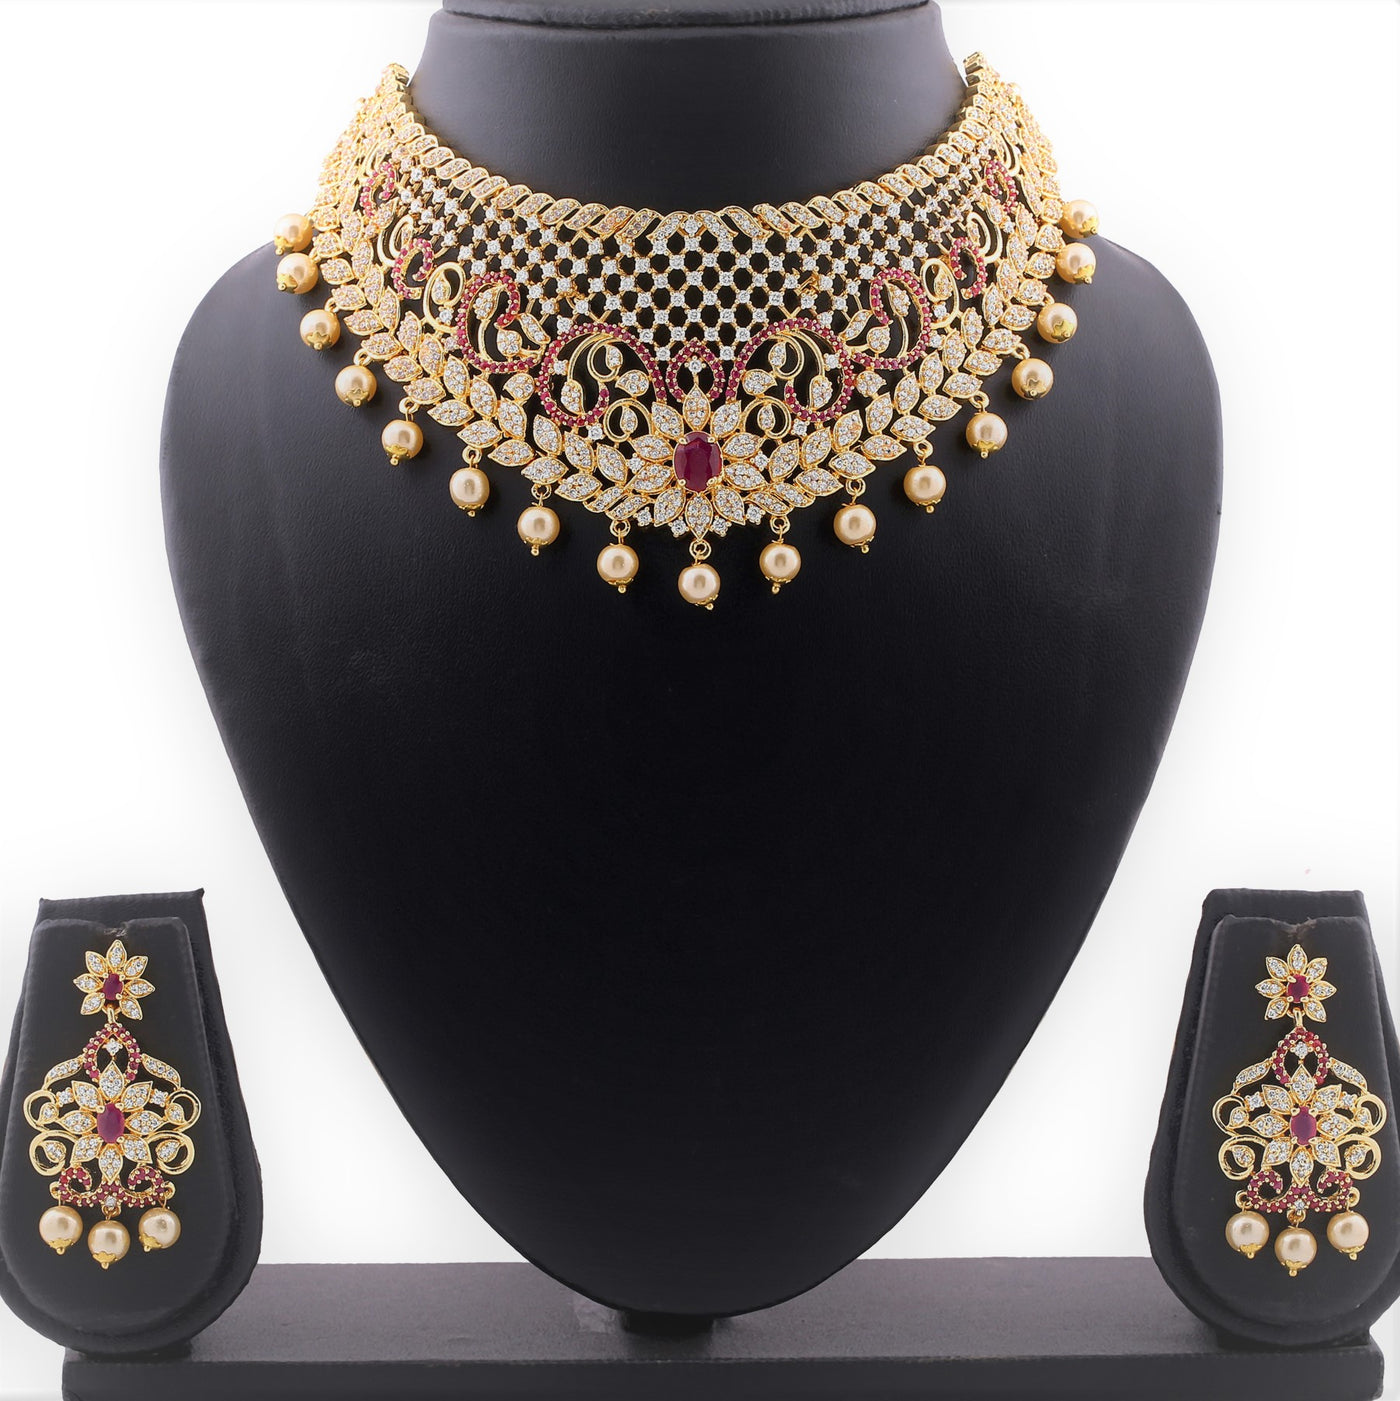 Estele Gold Plated CZ Bridal Choker Necklace Set with Red Crystals & Pearls for Women